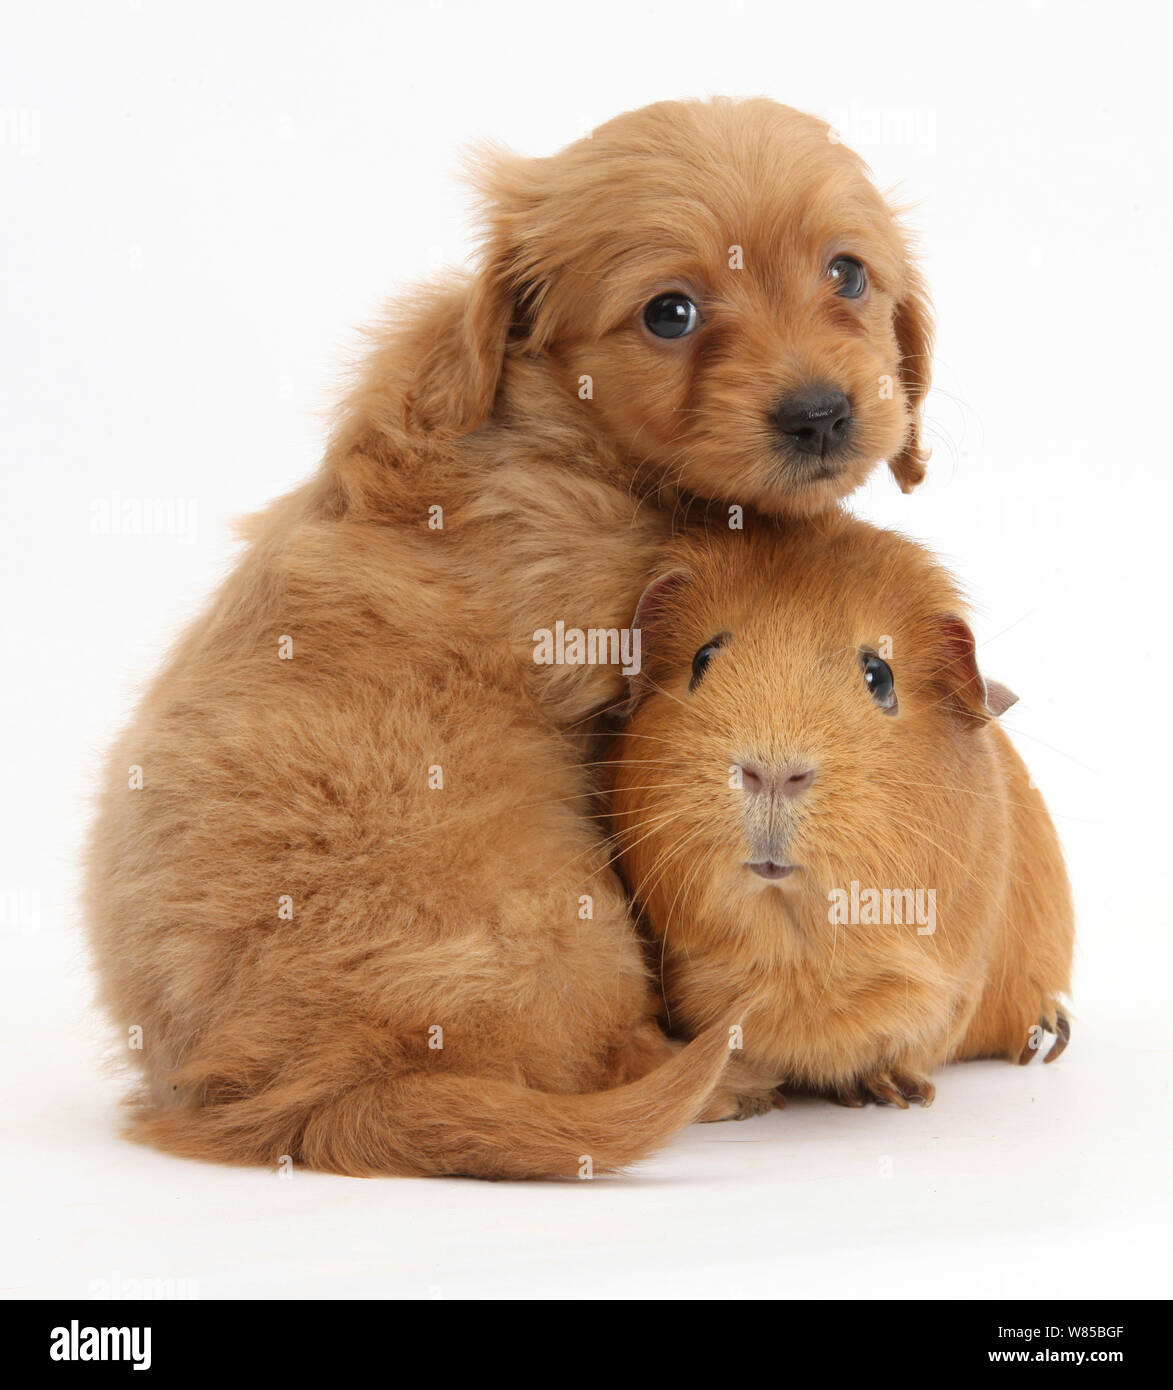 Red Daxiedoodle pup, 6 weeks, and Guinea pig, against white background Stock Photo